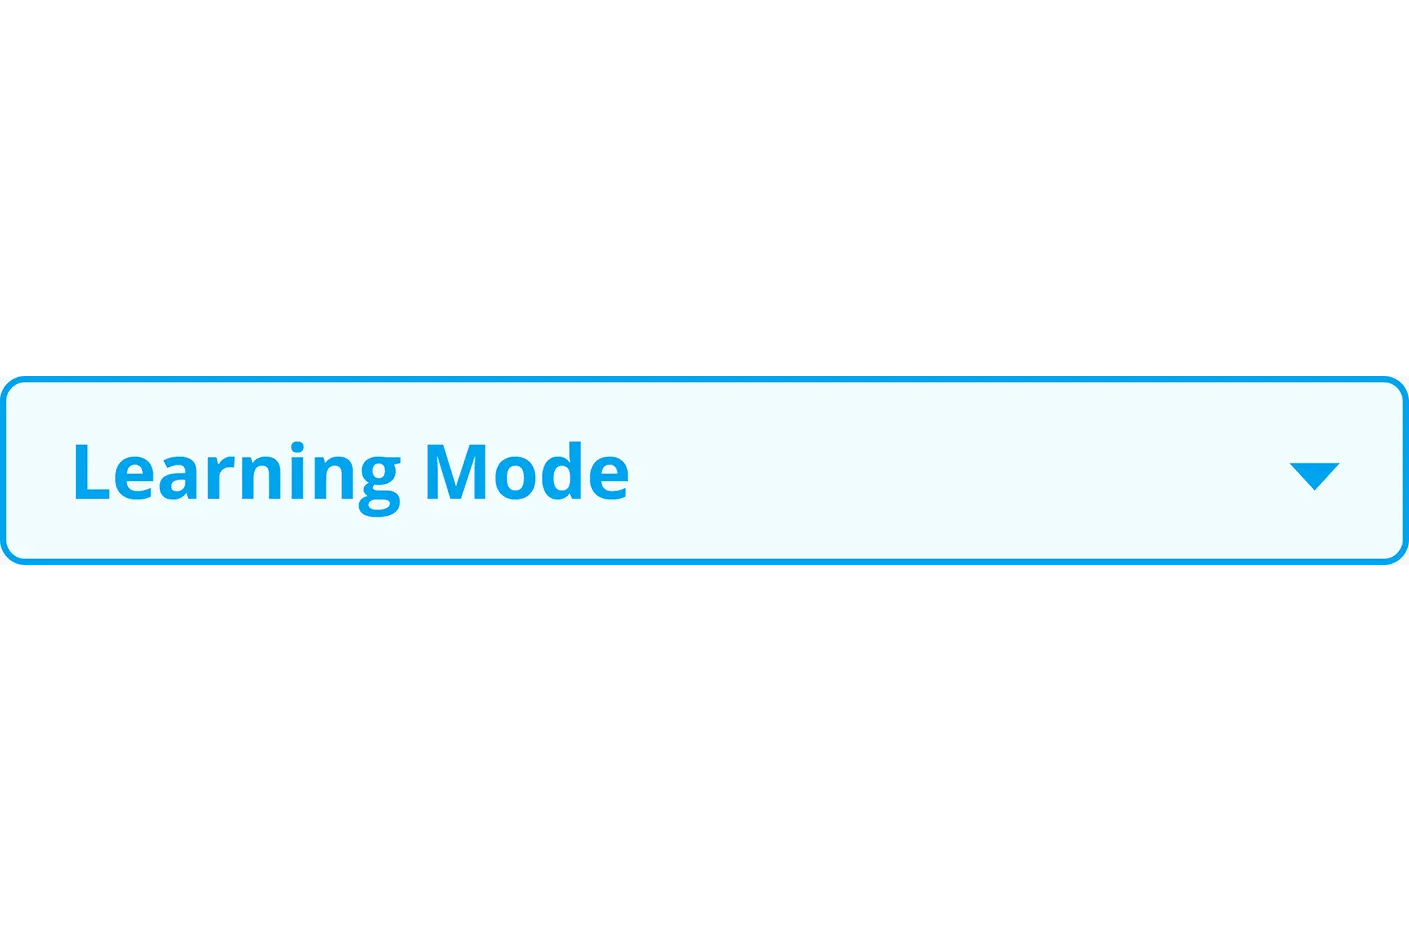 Learning mode selector of Beta Army Test practice test